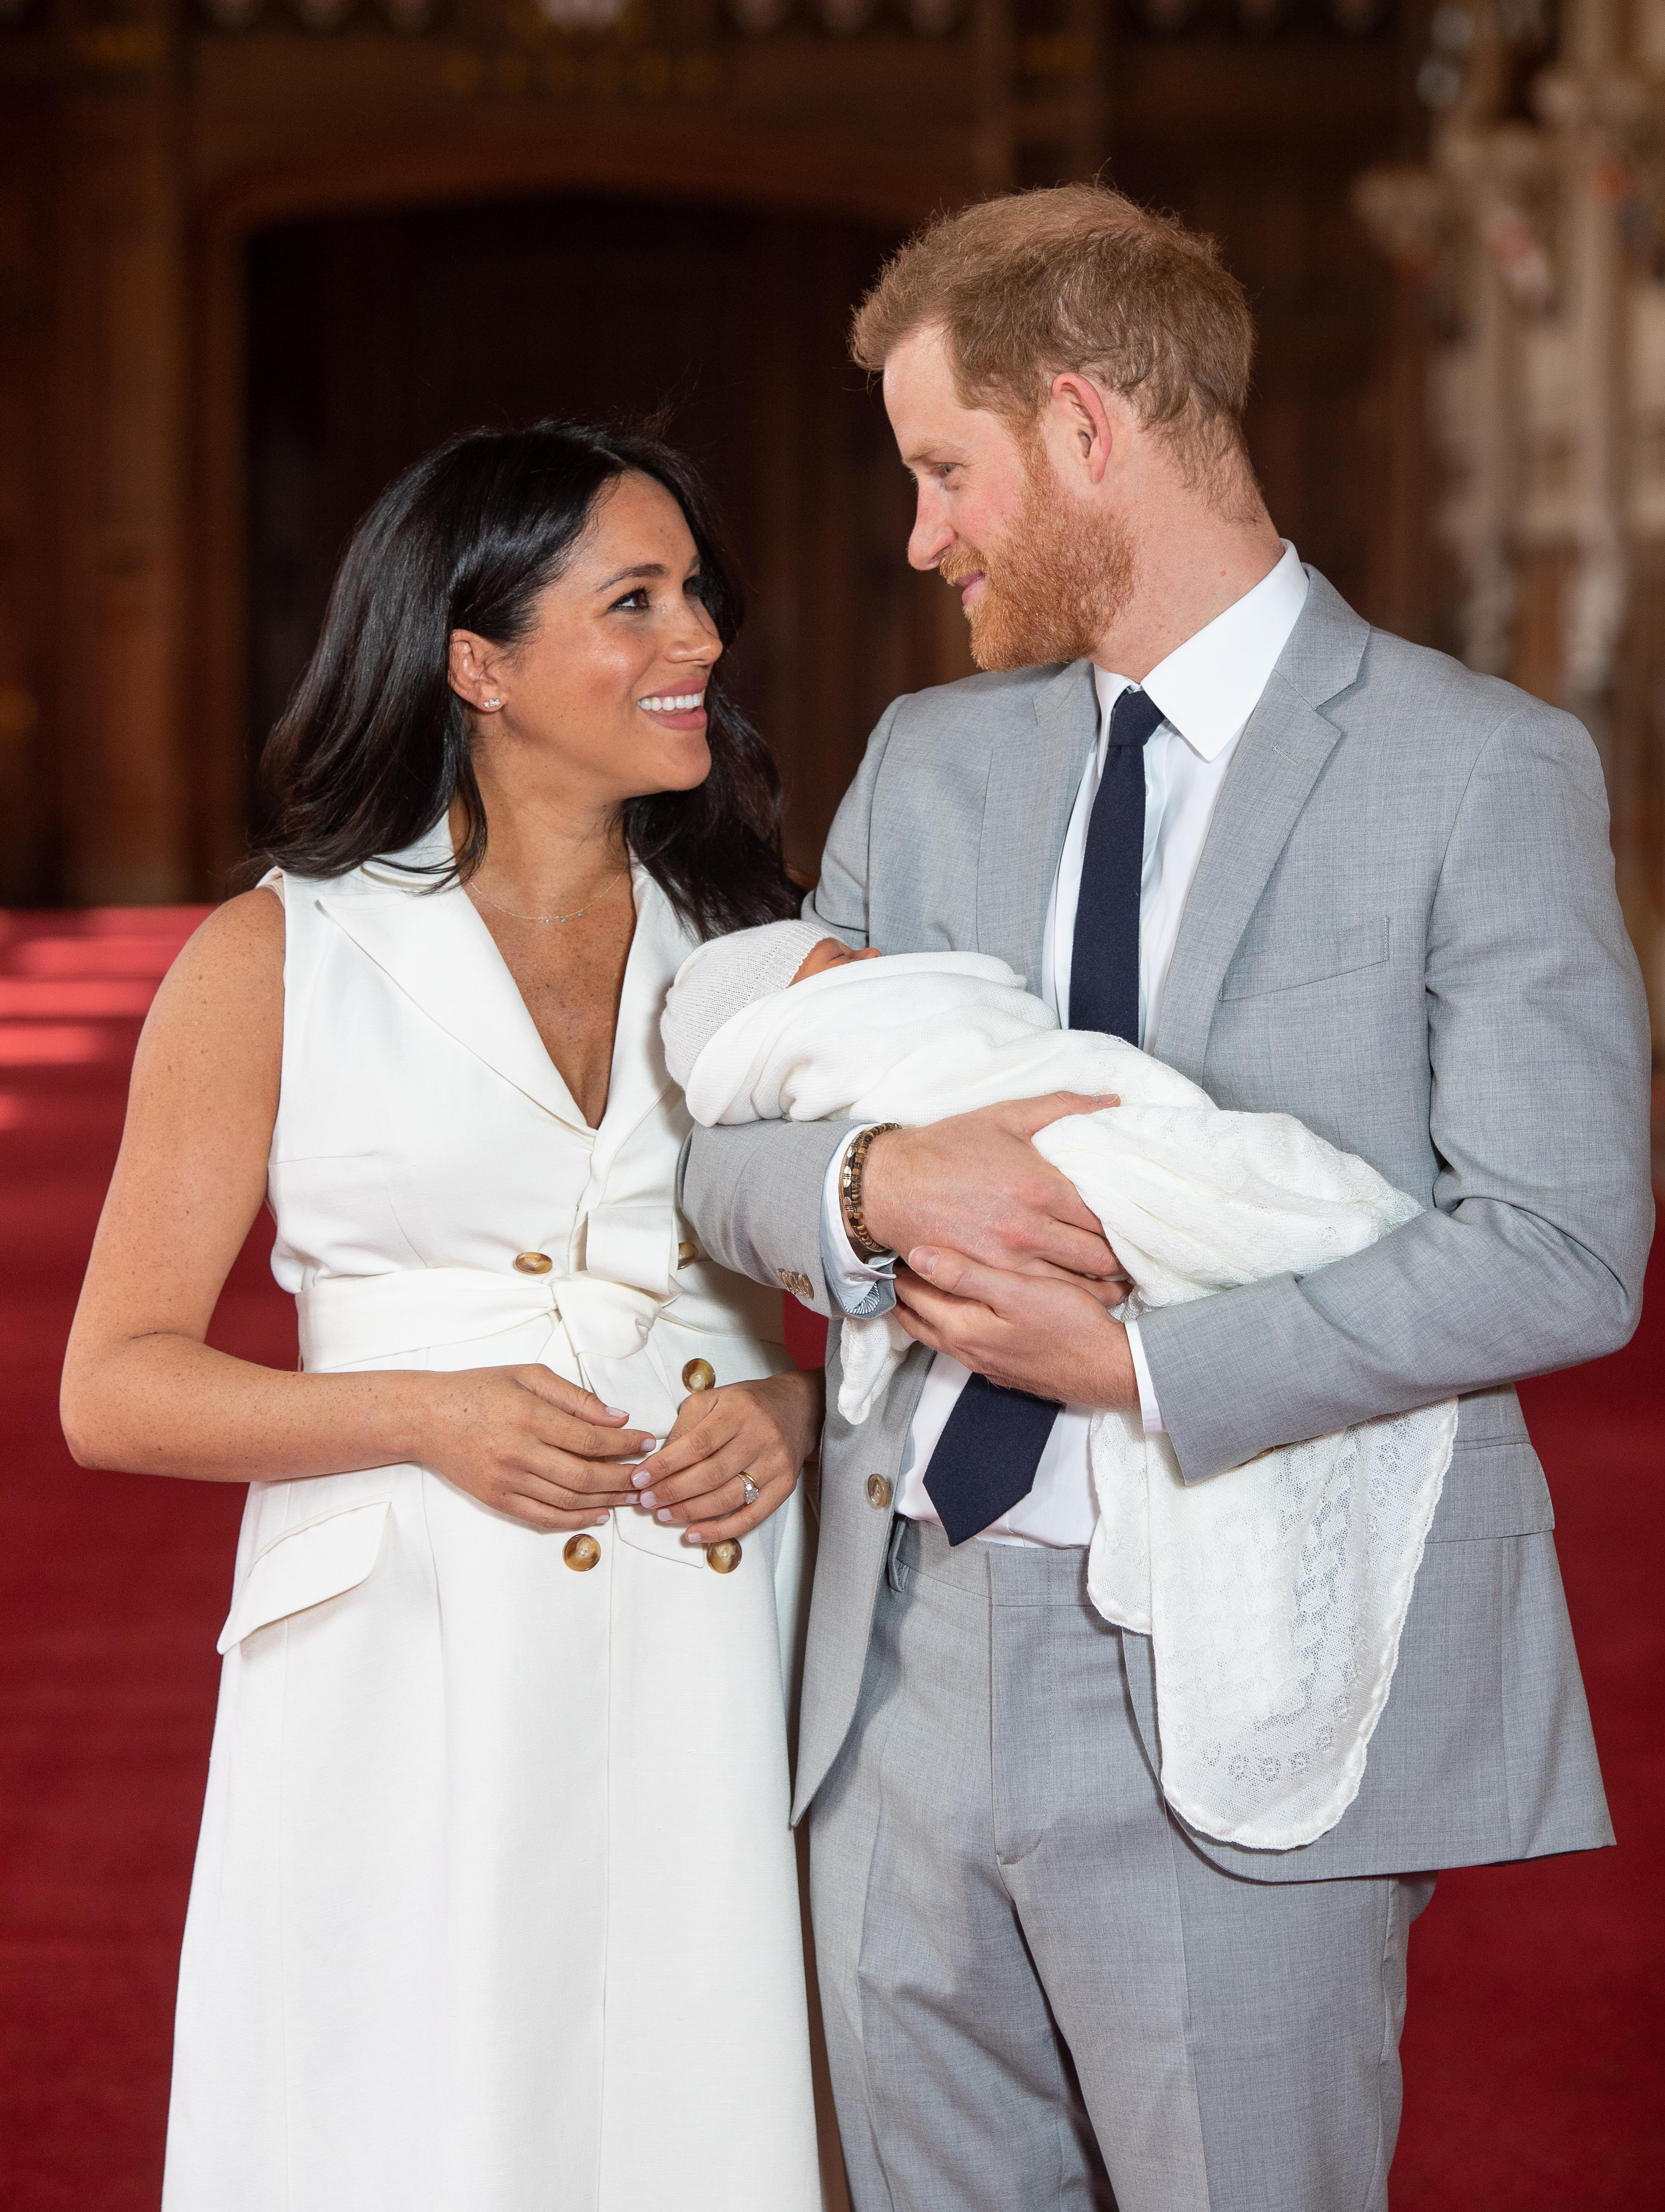 Meghan Markle, Prince Harry, and Prince Archie during a photocall in St George's Hall at Windsor Castle on May 8, 2019 in Windsor, England | Source: Getty Images